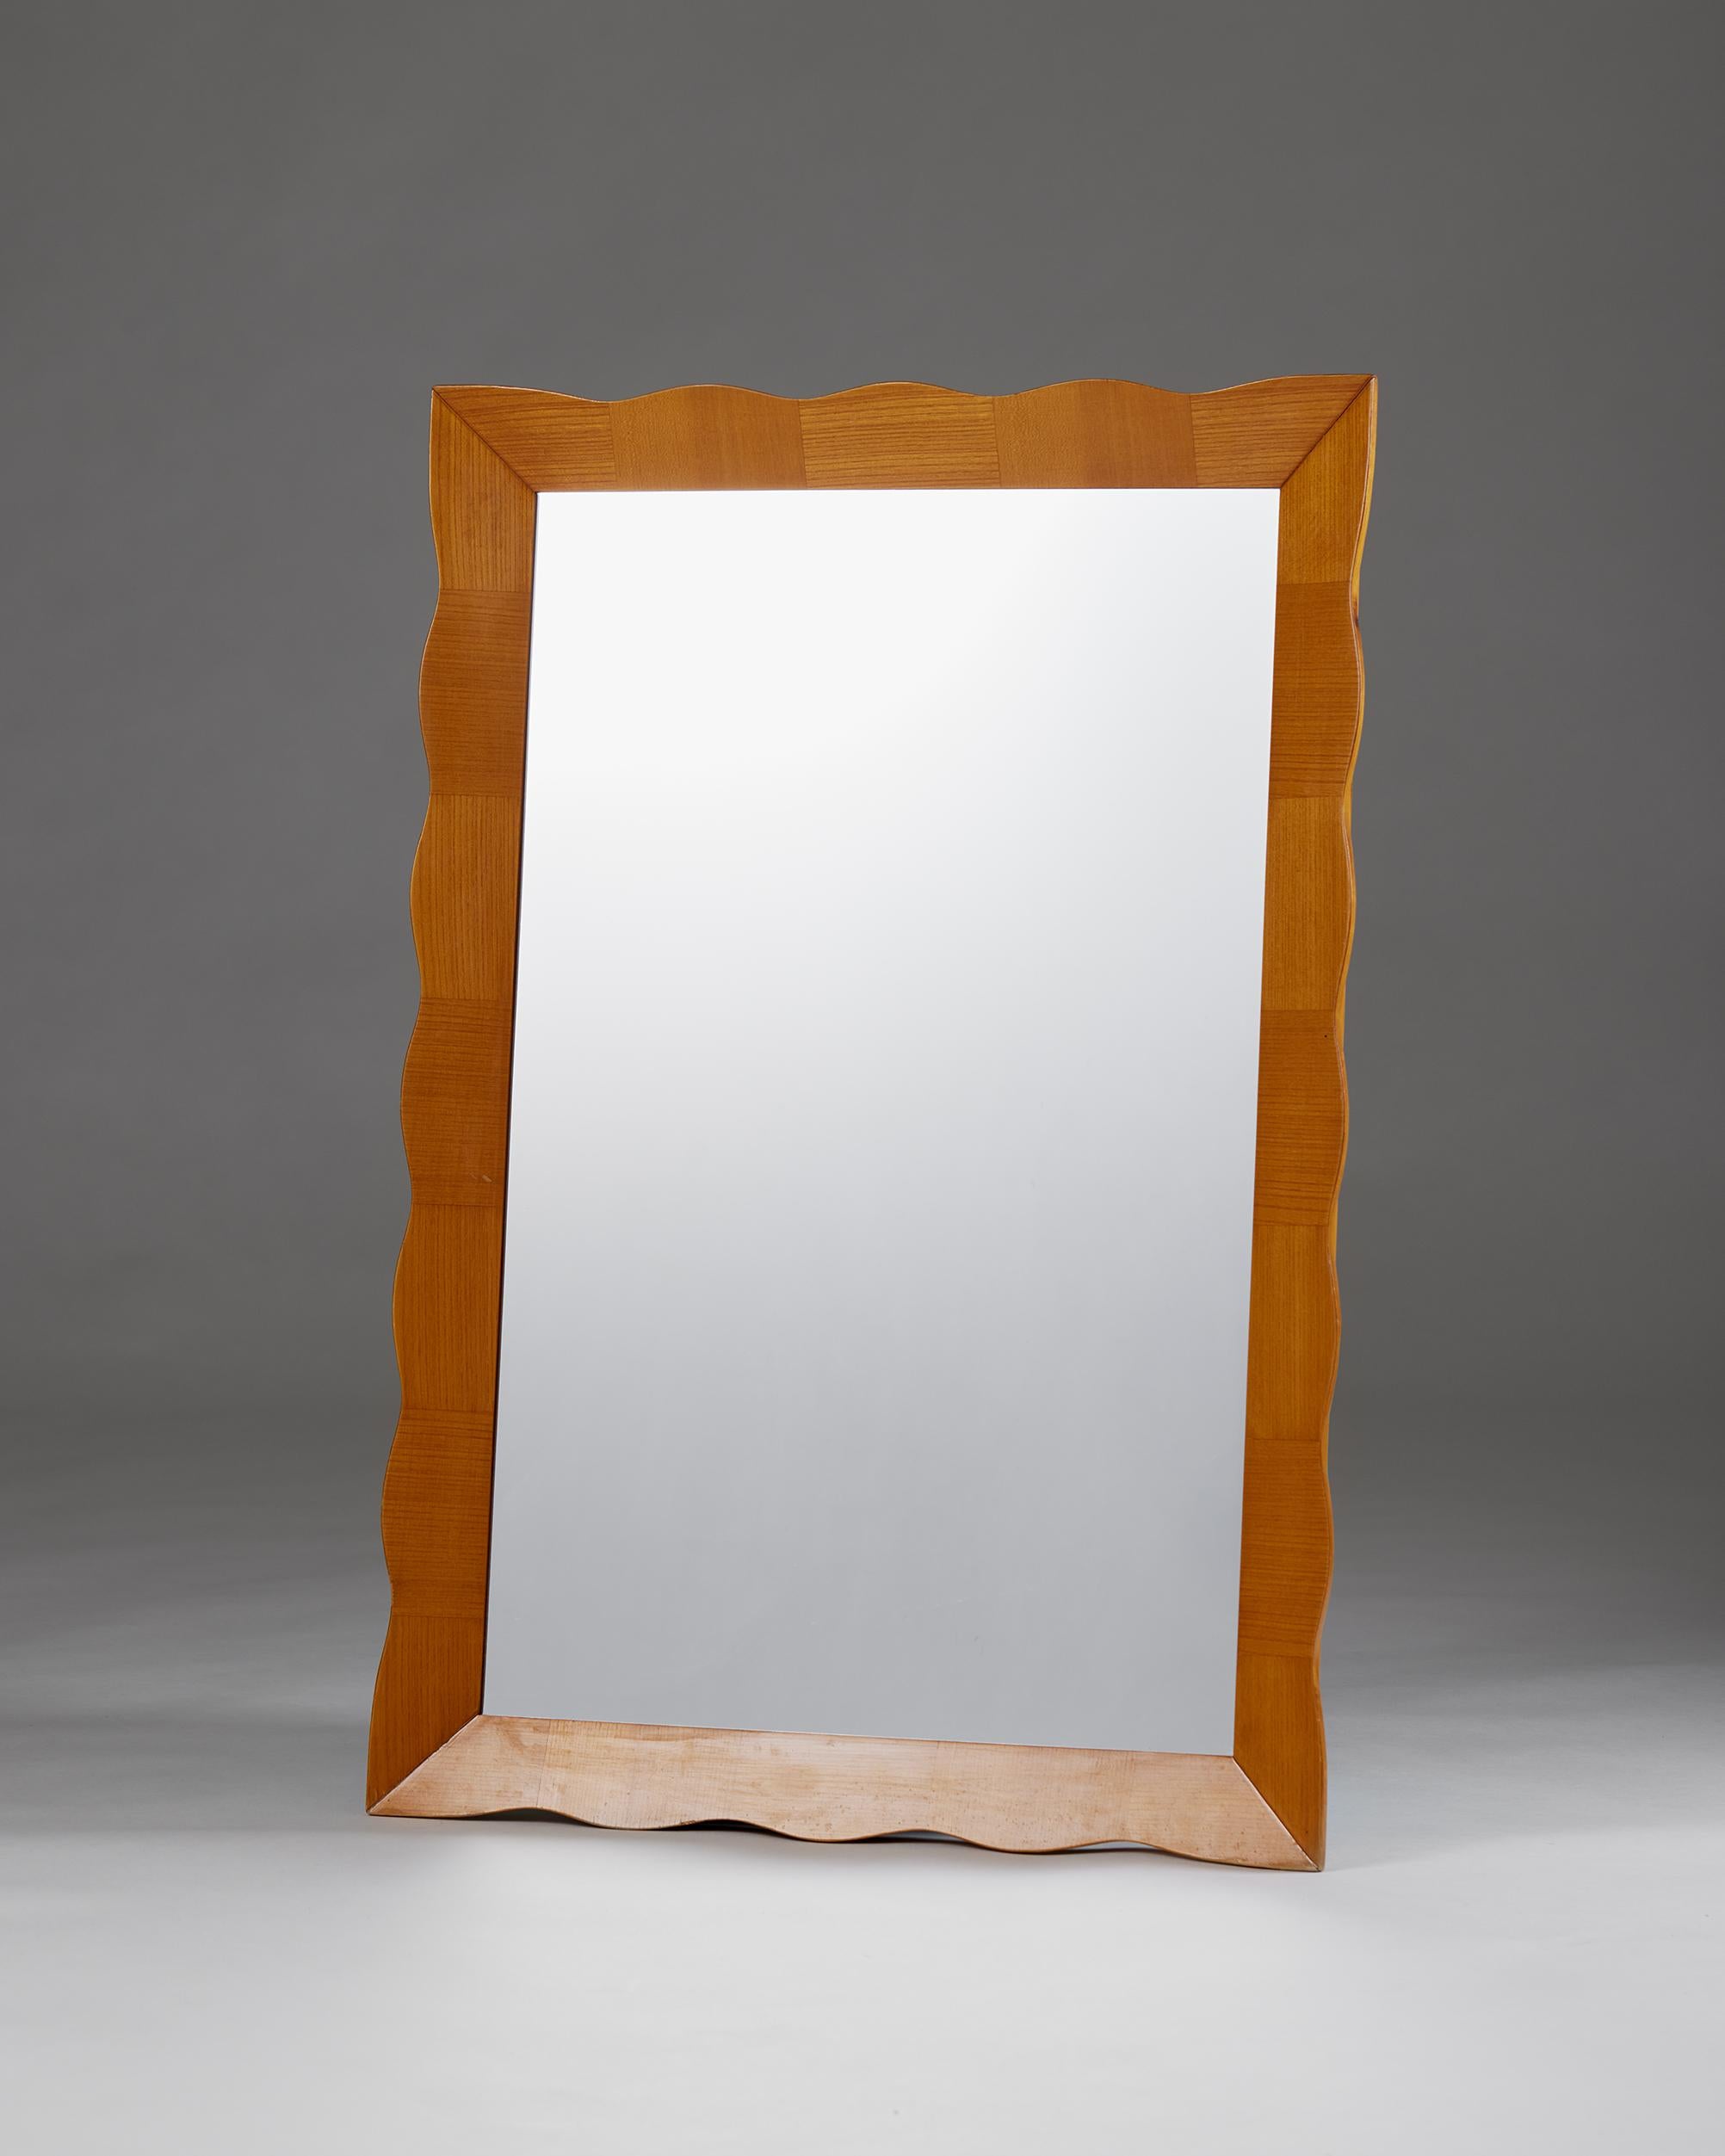 Wave wall mirror, anonymous,
Sweden, 1960s

Elm and mirrored glass.